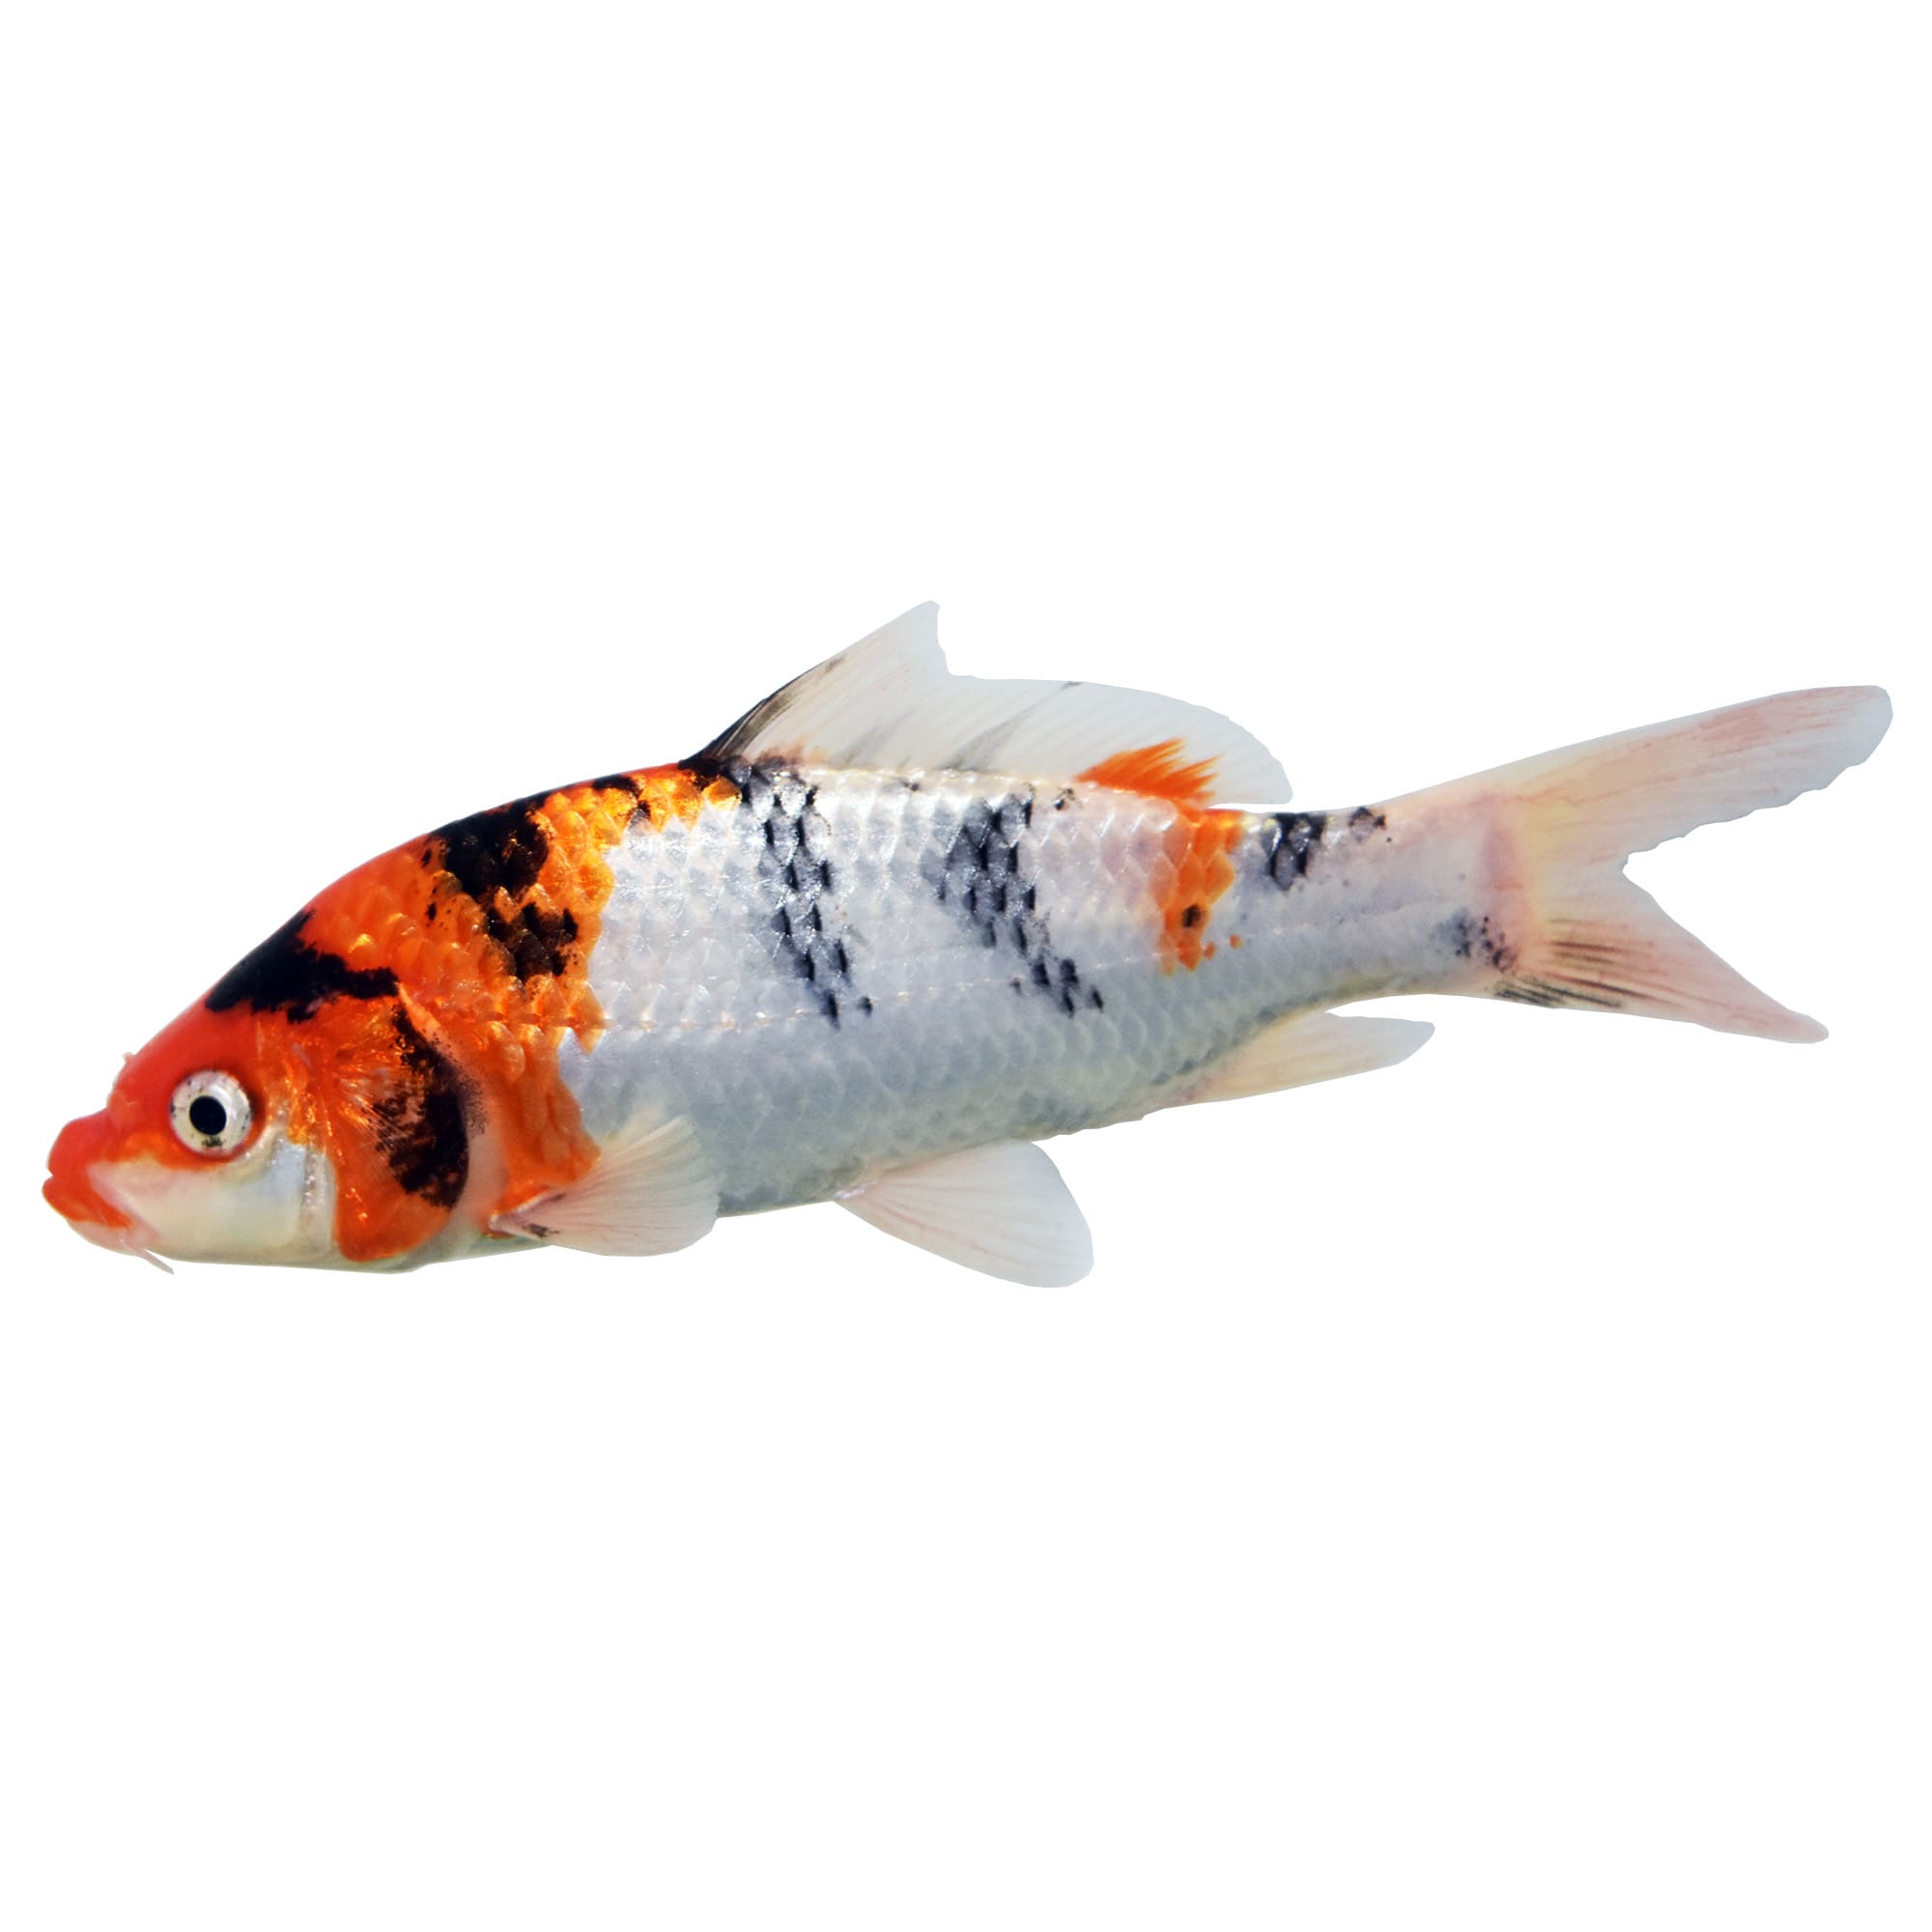 Koi Grade A Fish for Sale: Order Online 